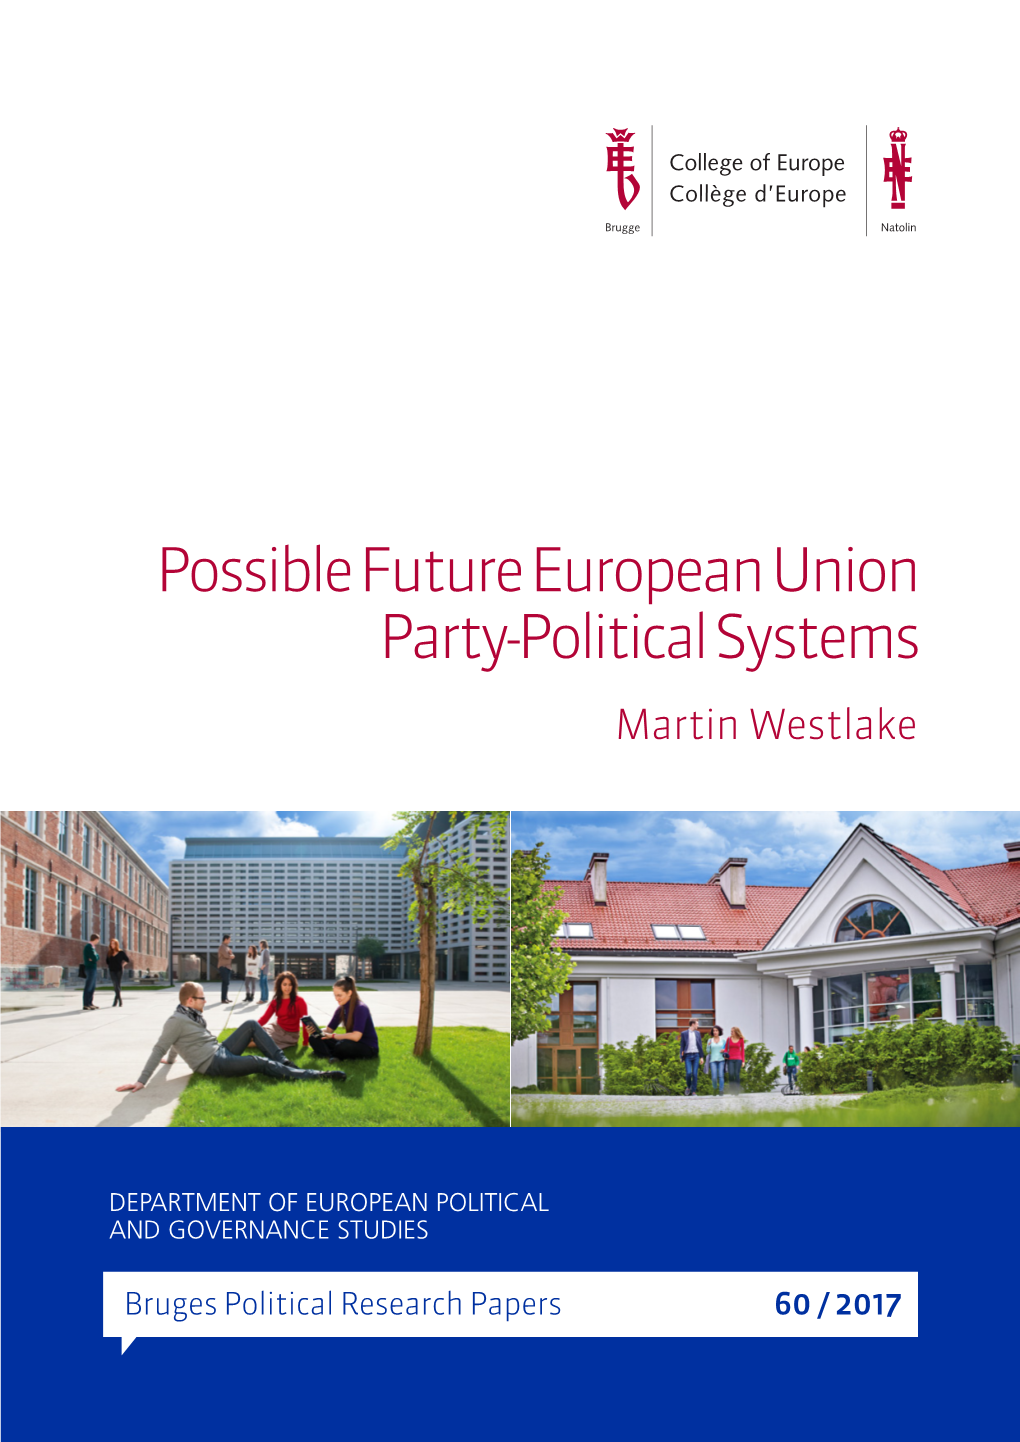 Possible Future European Union Party-Political Systems Martin Westlake